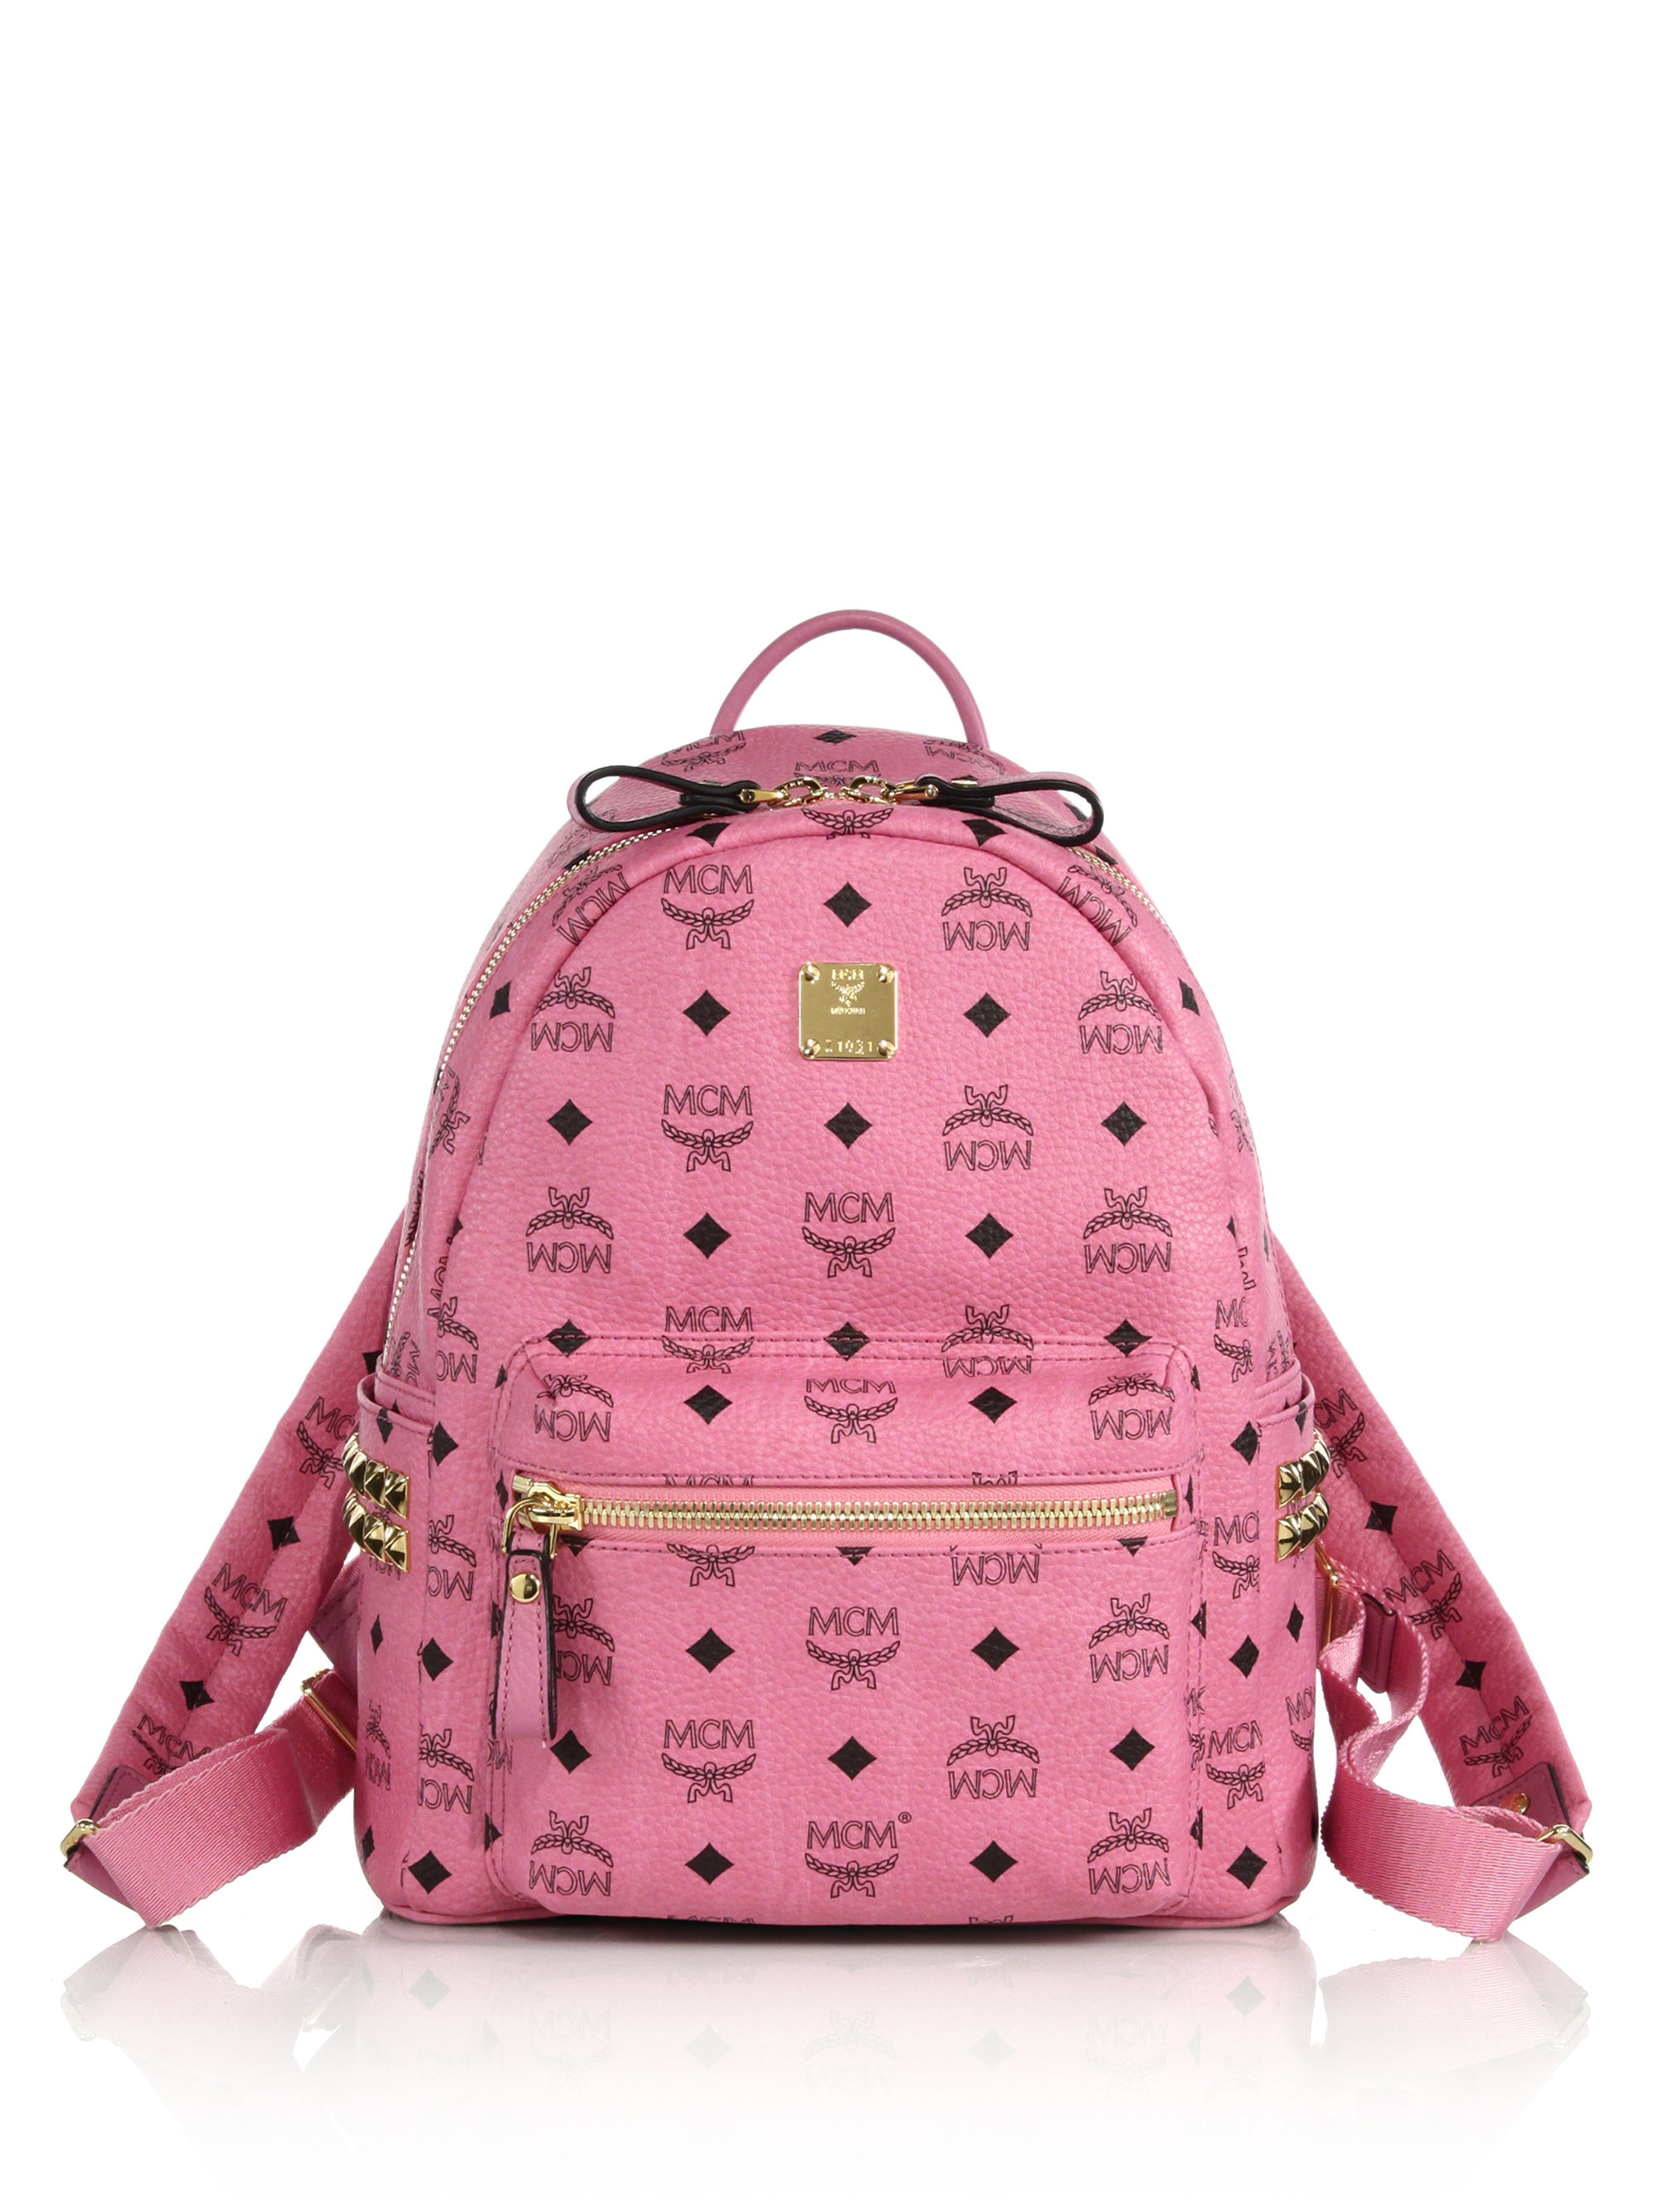 Mcm Stark Small Side Stud Coated Canvas Backpack in Pink | Lyst